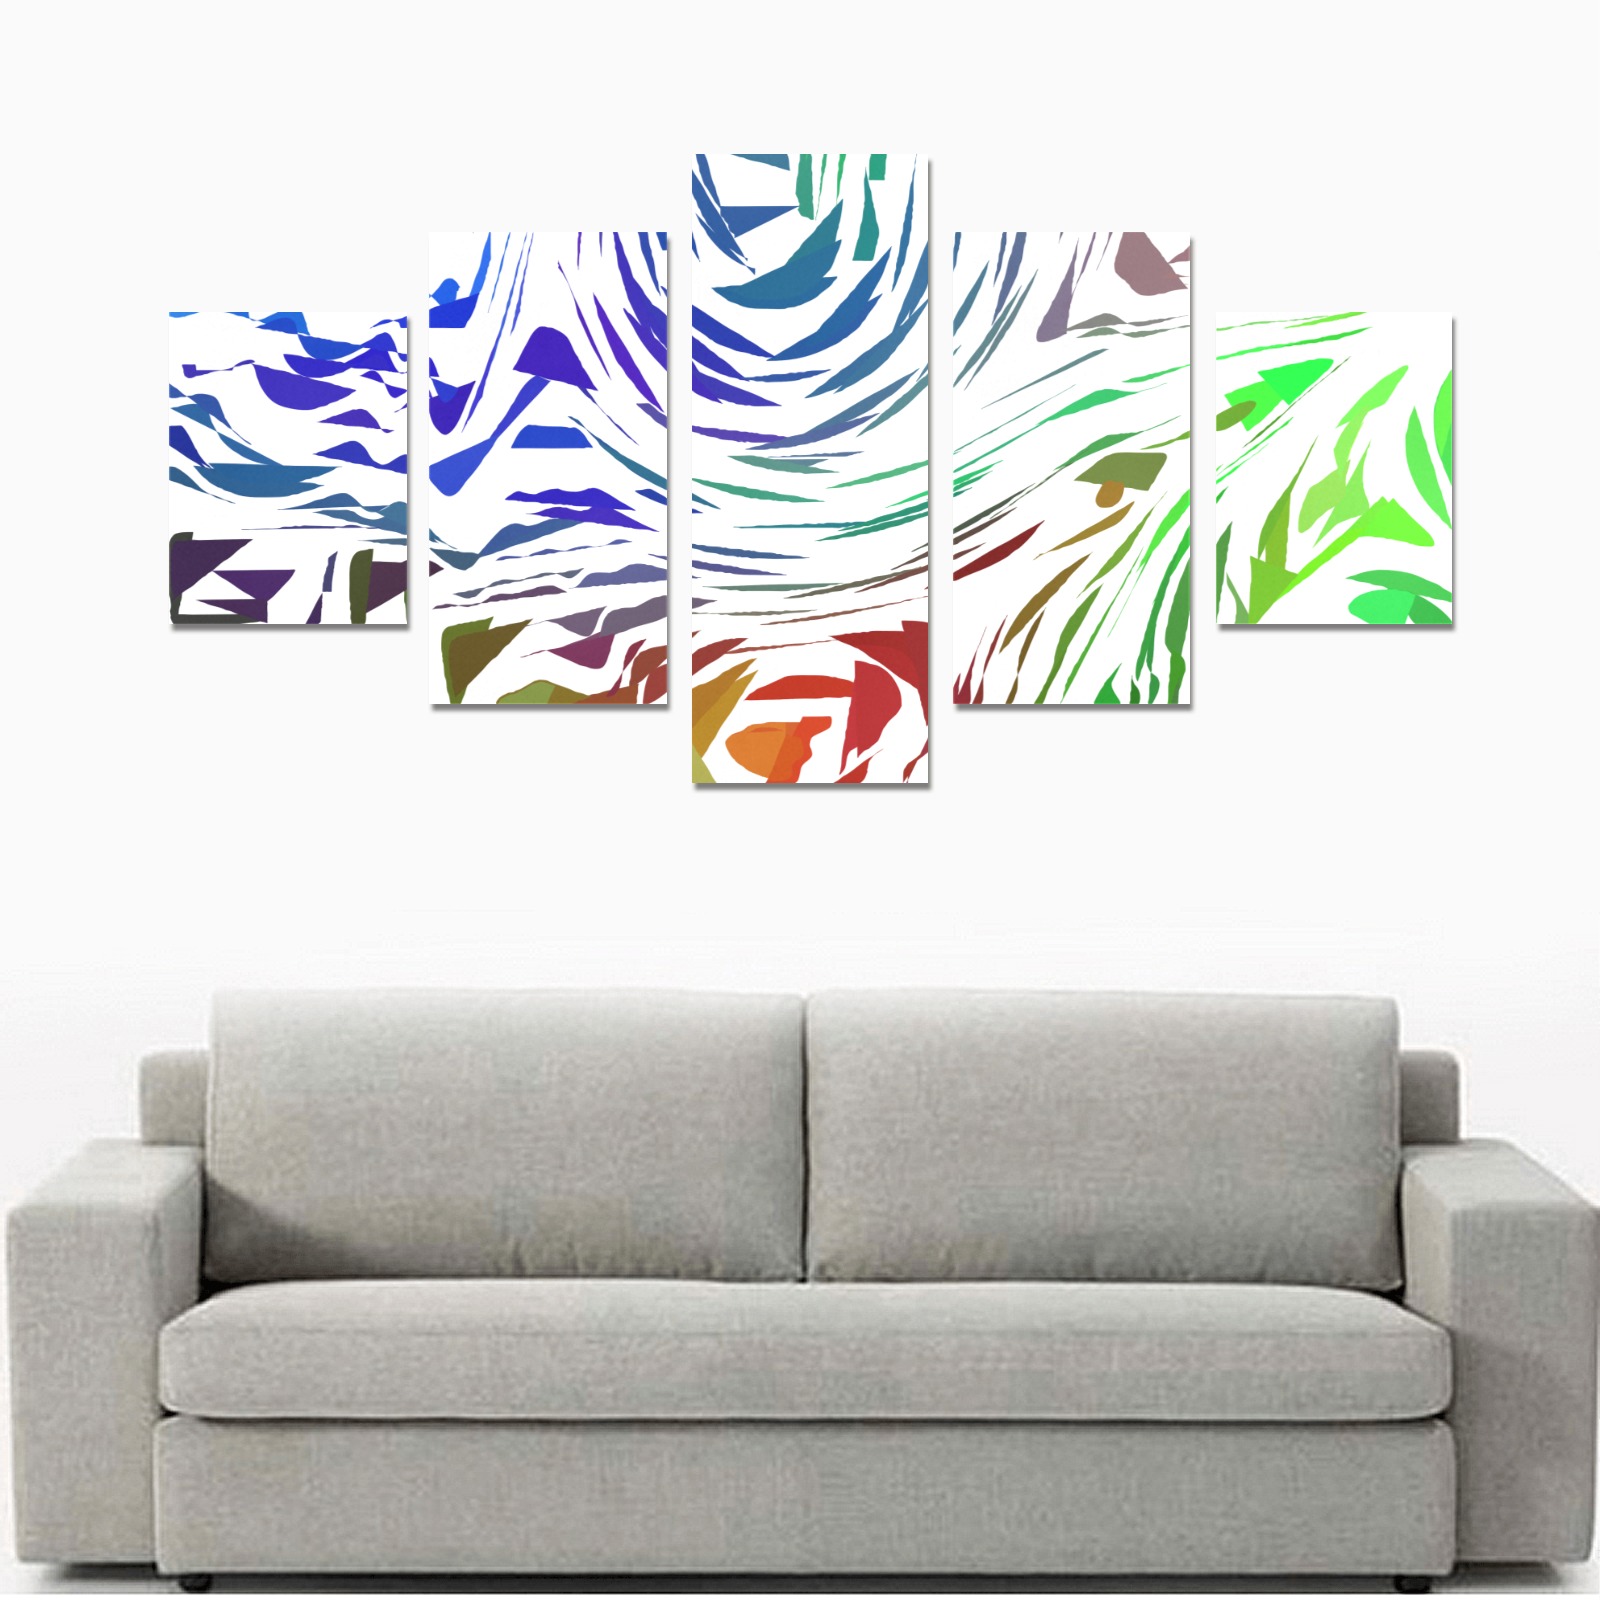 Cutout Shapes on White Abstract Canvas Print Sets B (No Frame)